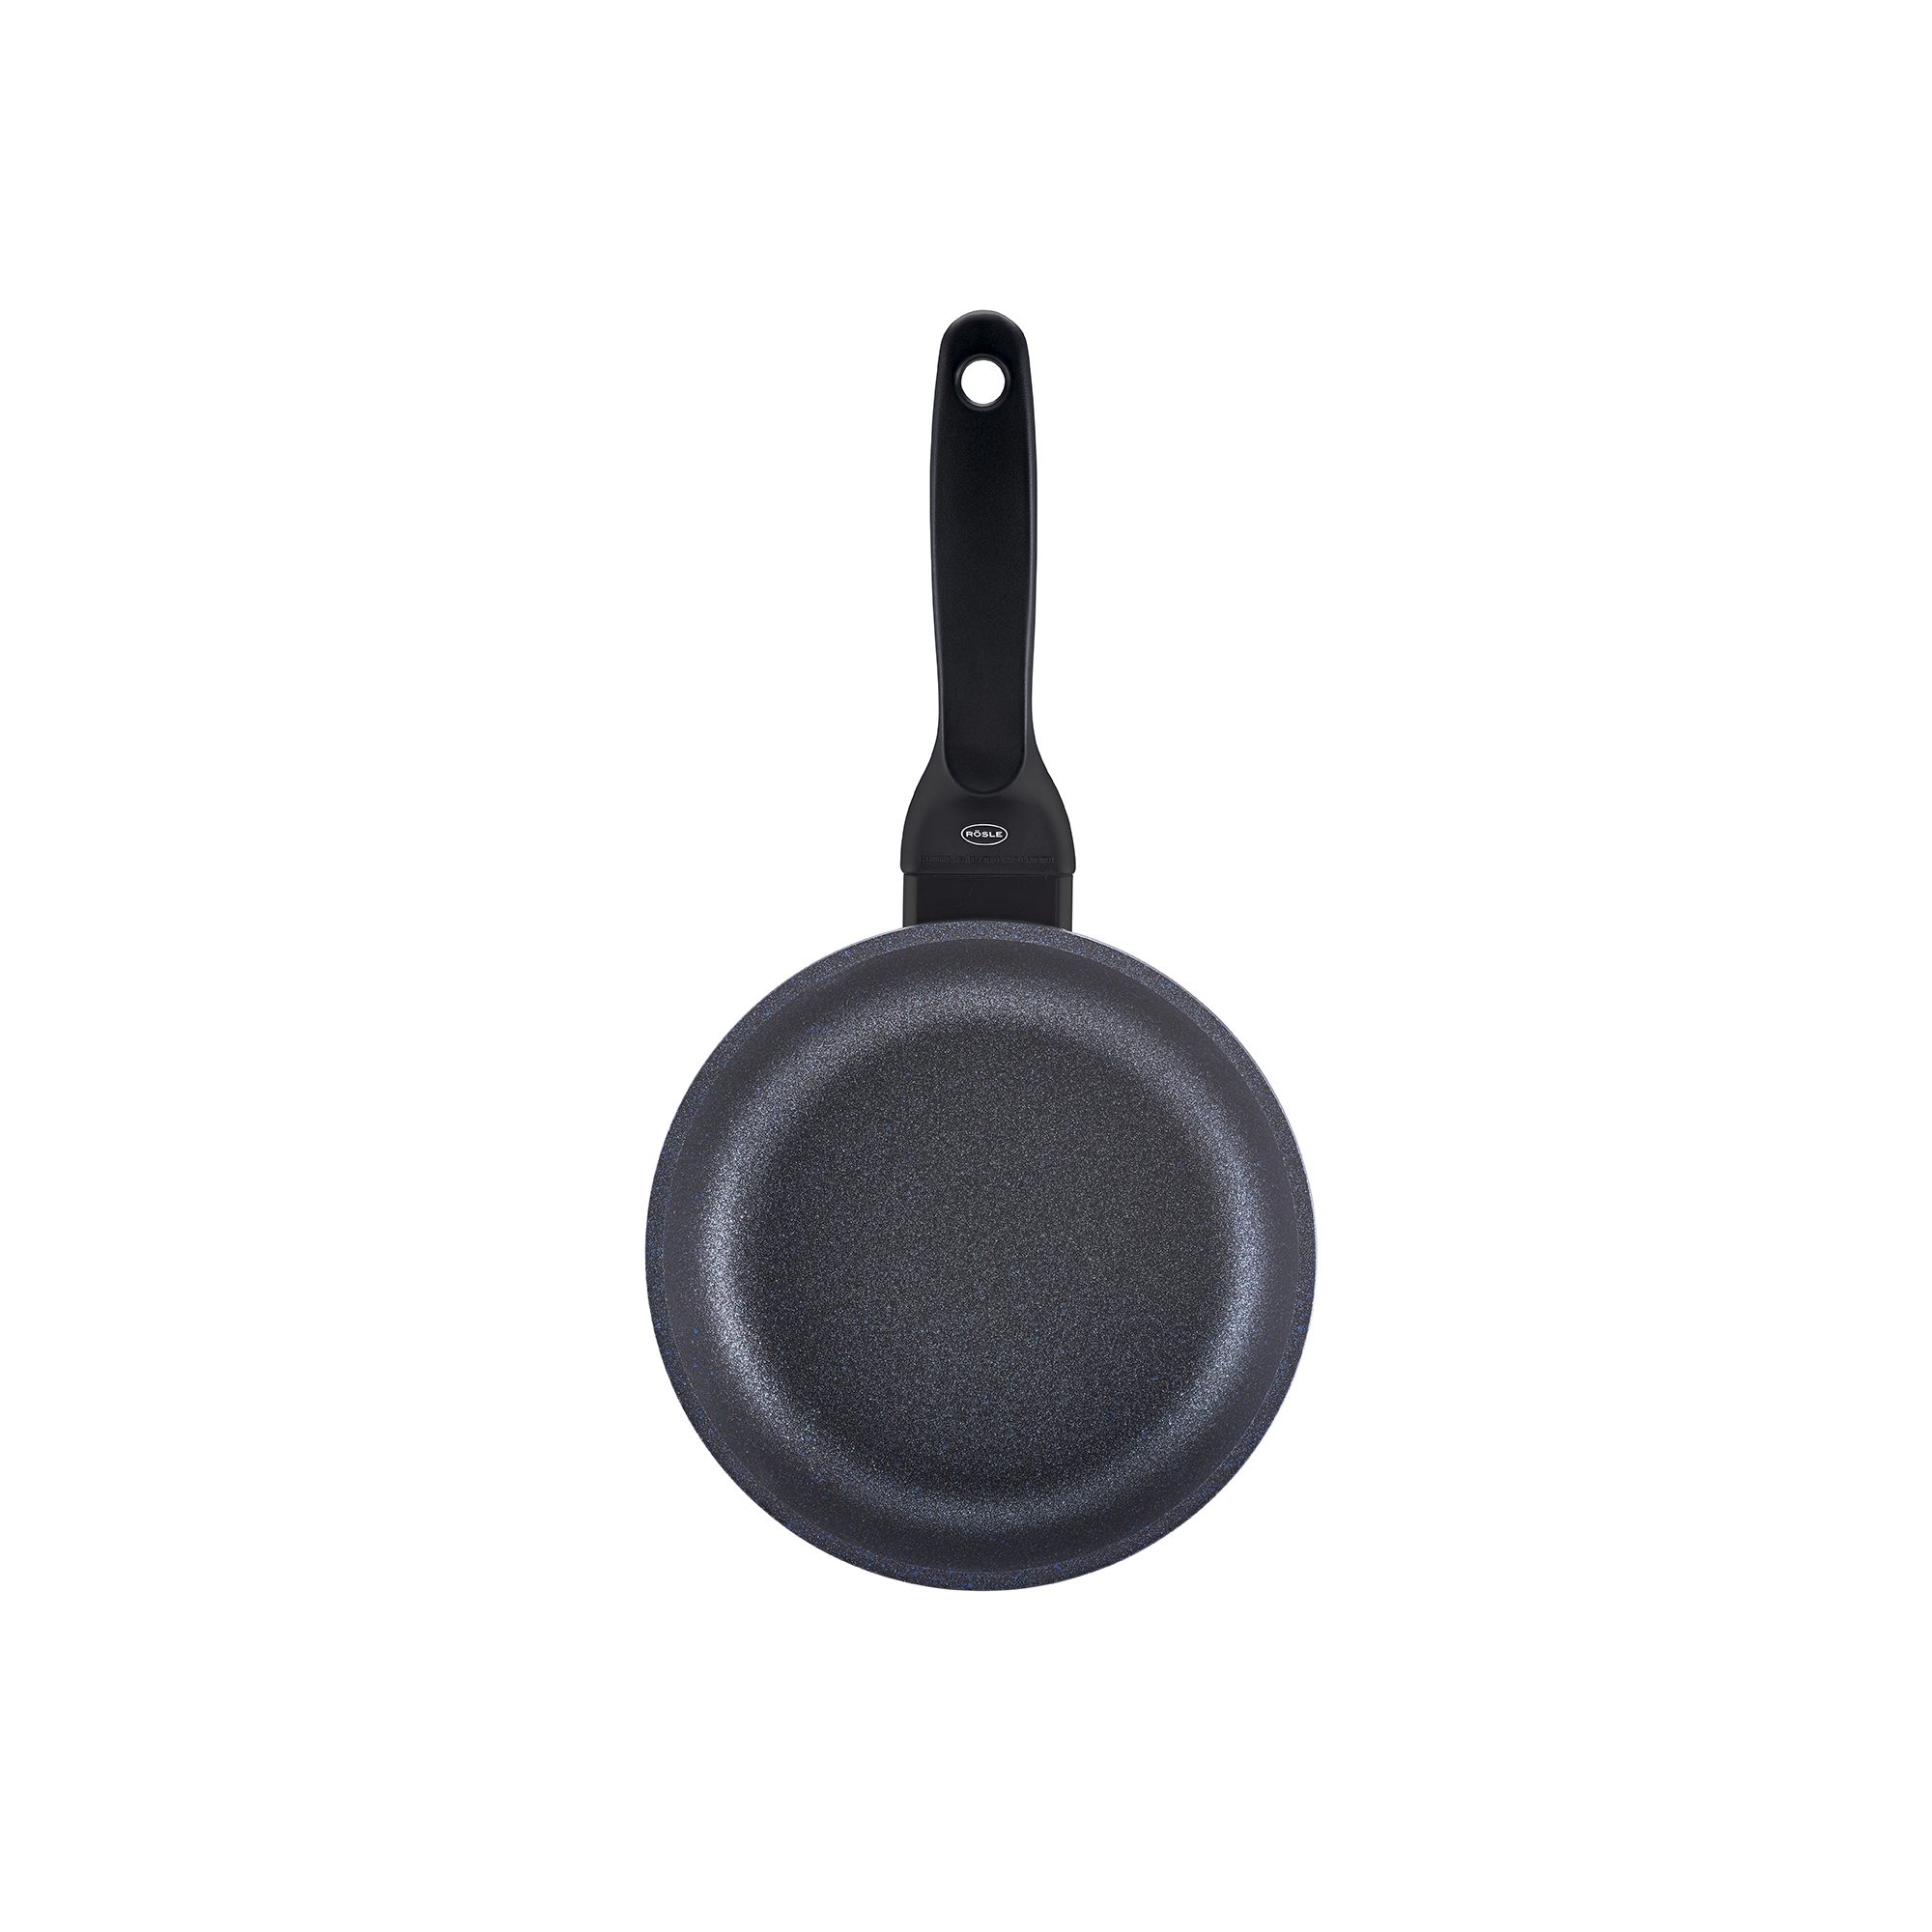 Frying Pan "Cadini" Ø 20 cm | 8.0 in. from cast aluminum with non-stick coating ProResist®